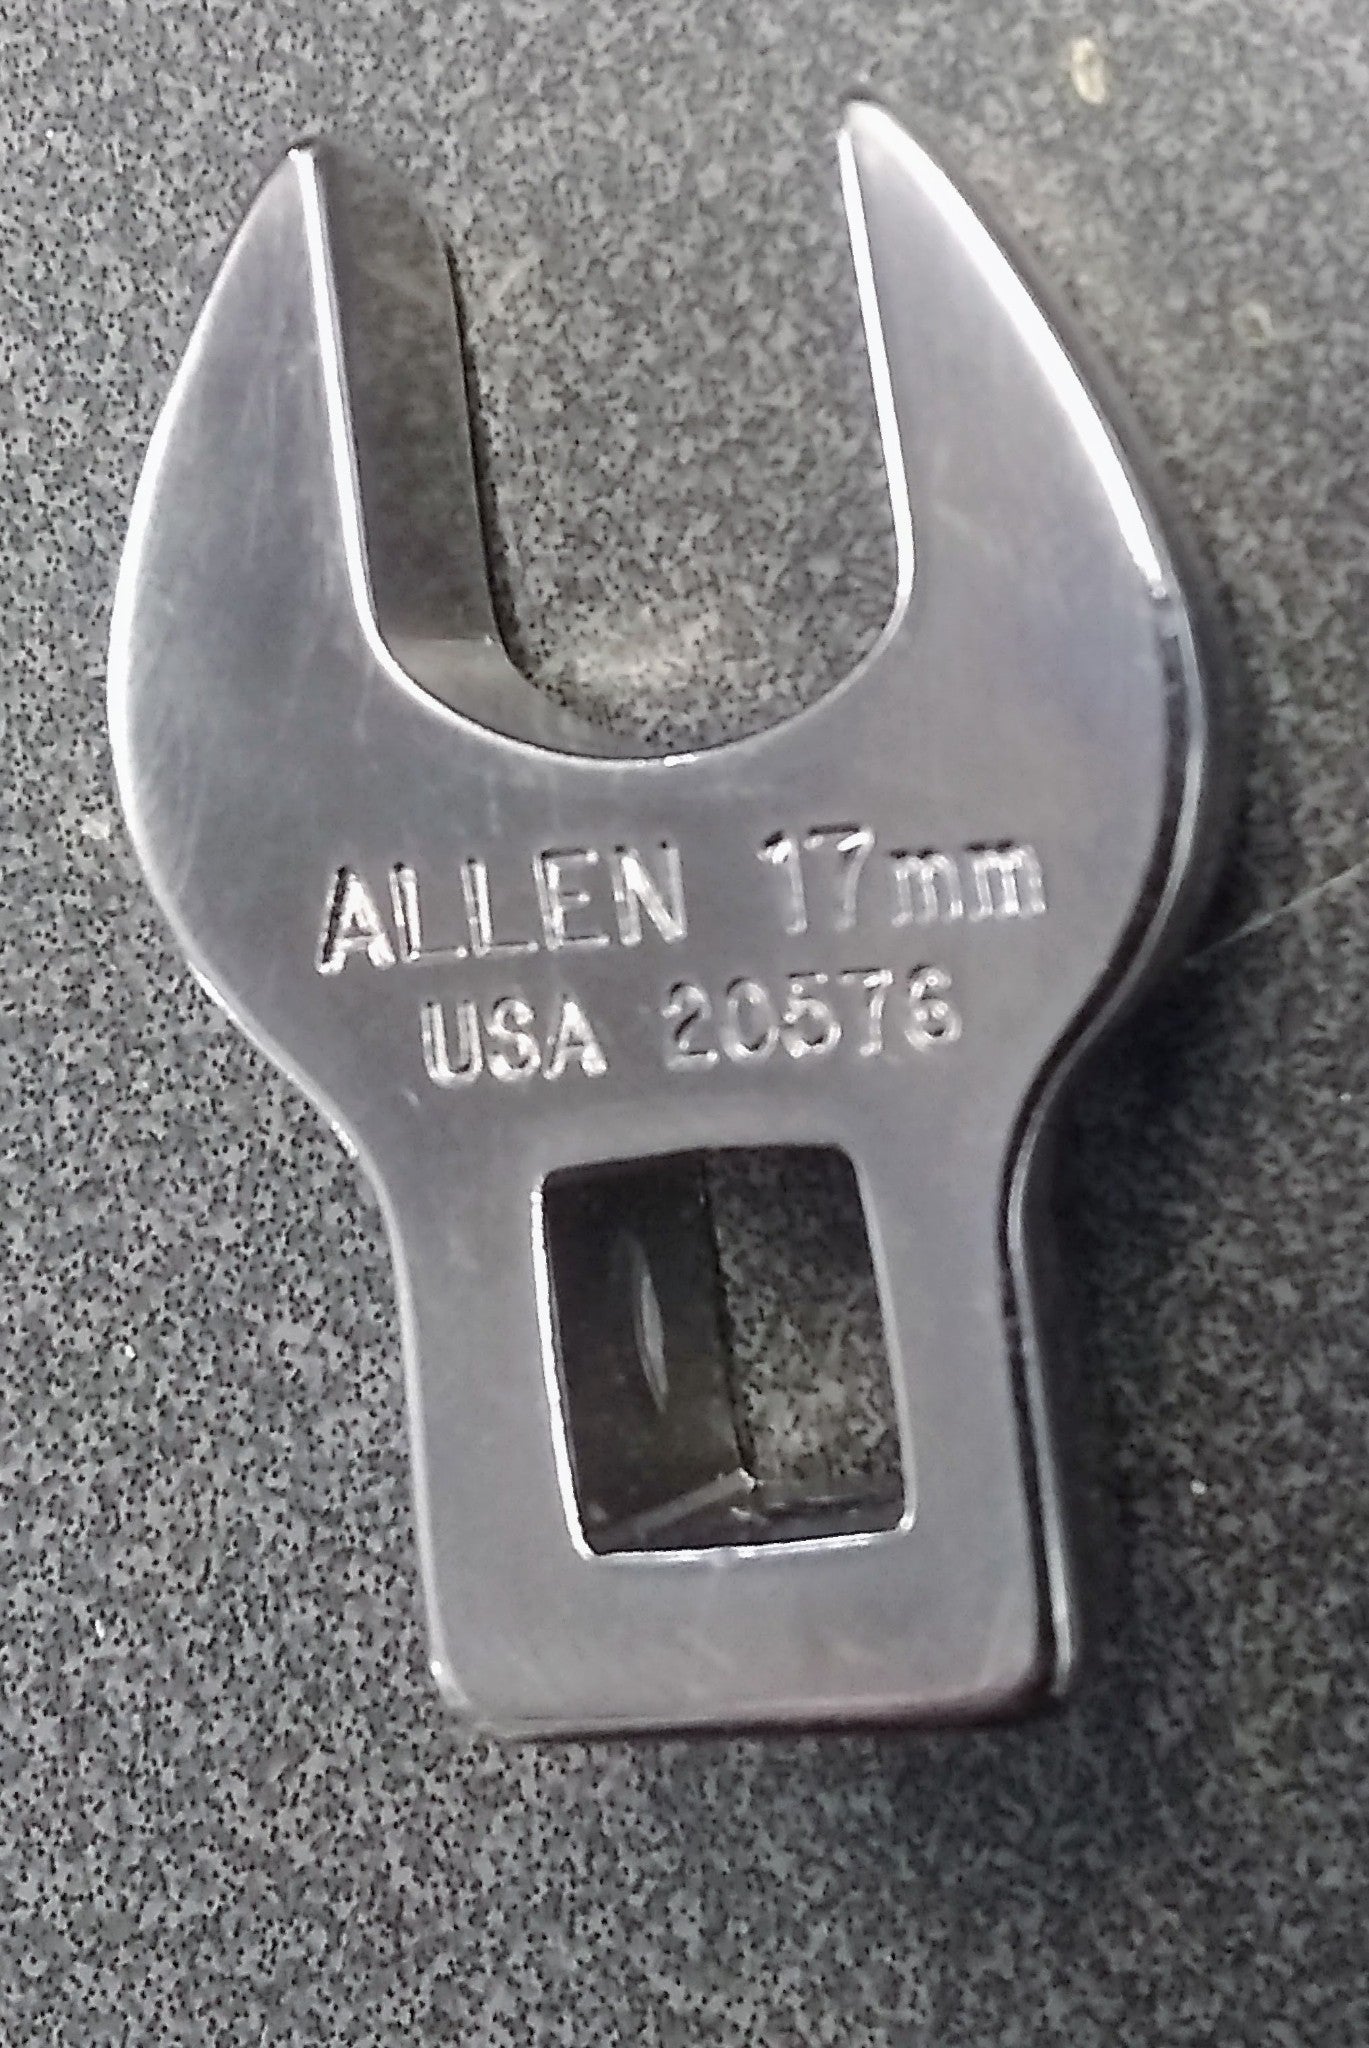 Allen 20576 17mm Crowfoot Non-Ratcheting Wrench 3/8" Drive USA